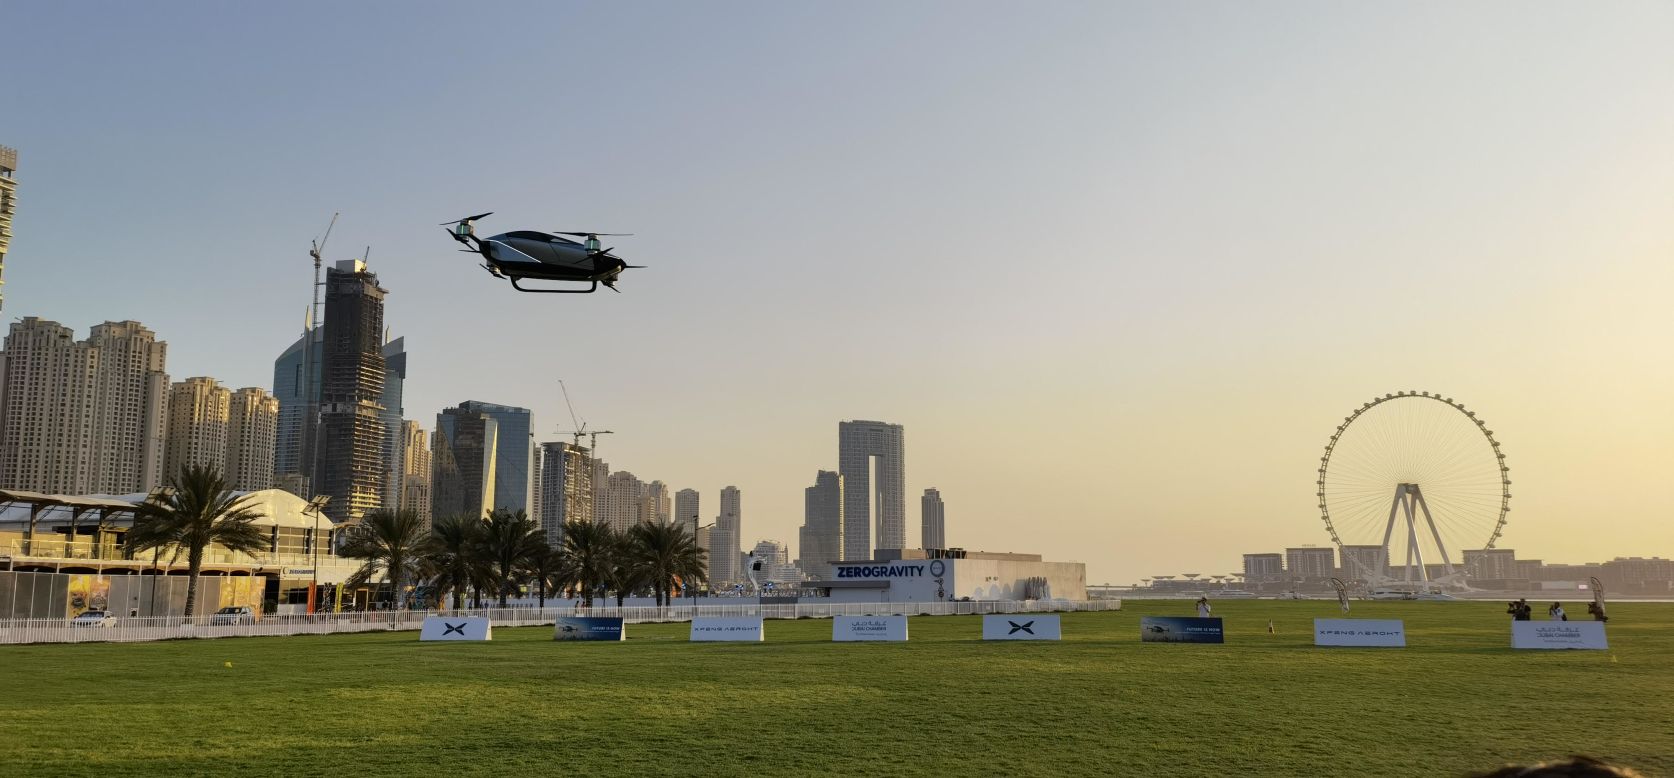 One of dozens of aerial automobiles currently in development, the XPeng X2 electric flying car completed its first public test flight in Dubai at the Gitex 2022 technology expo.